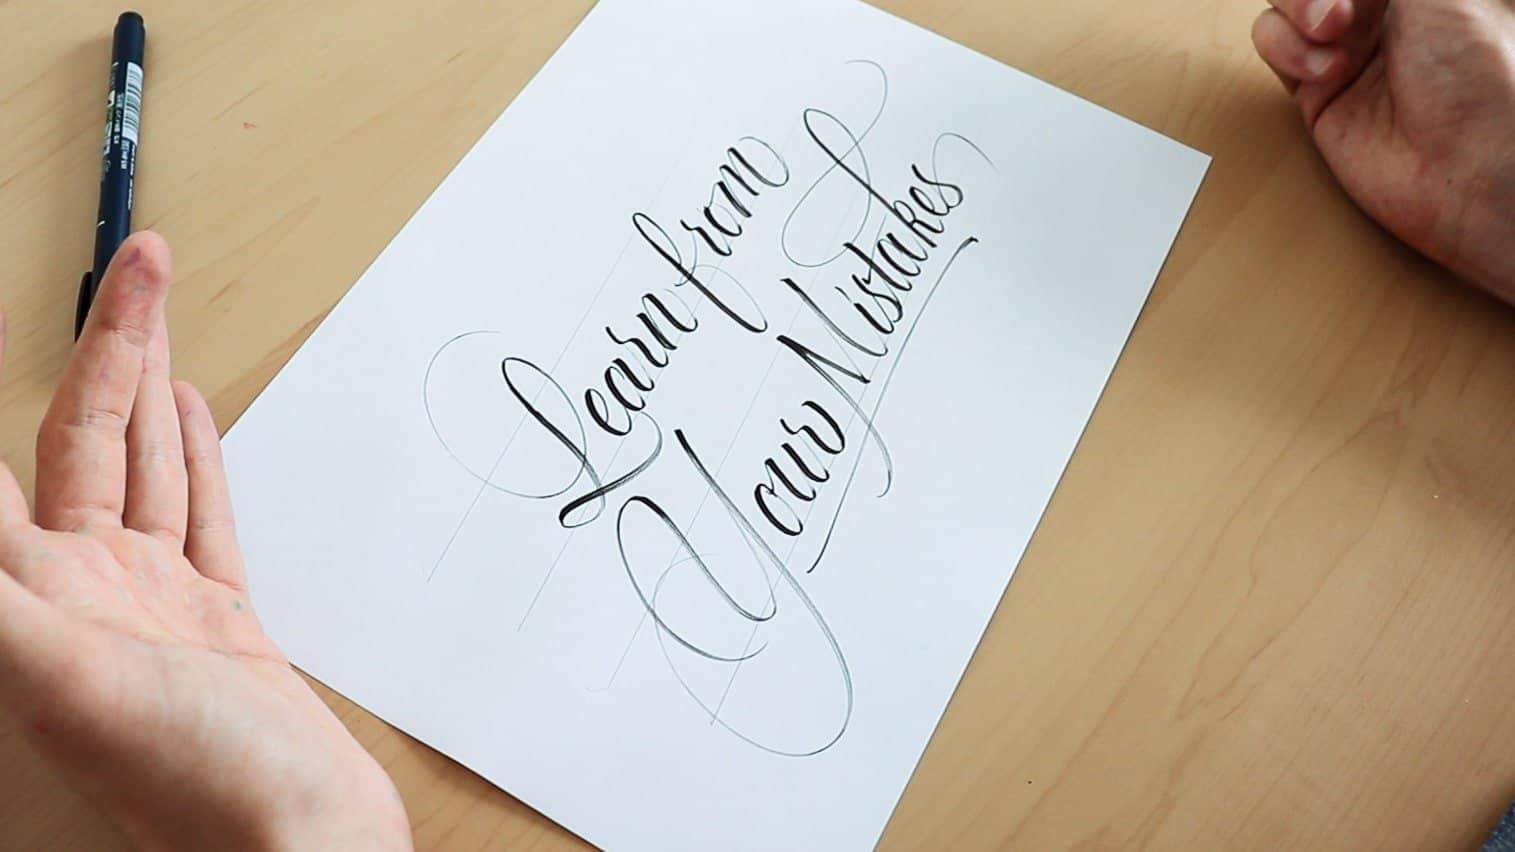 Do's and Don'ts For Calligraphy Beginners, by chris napa